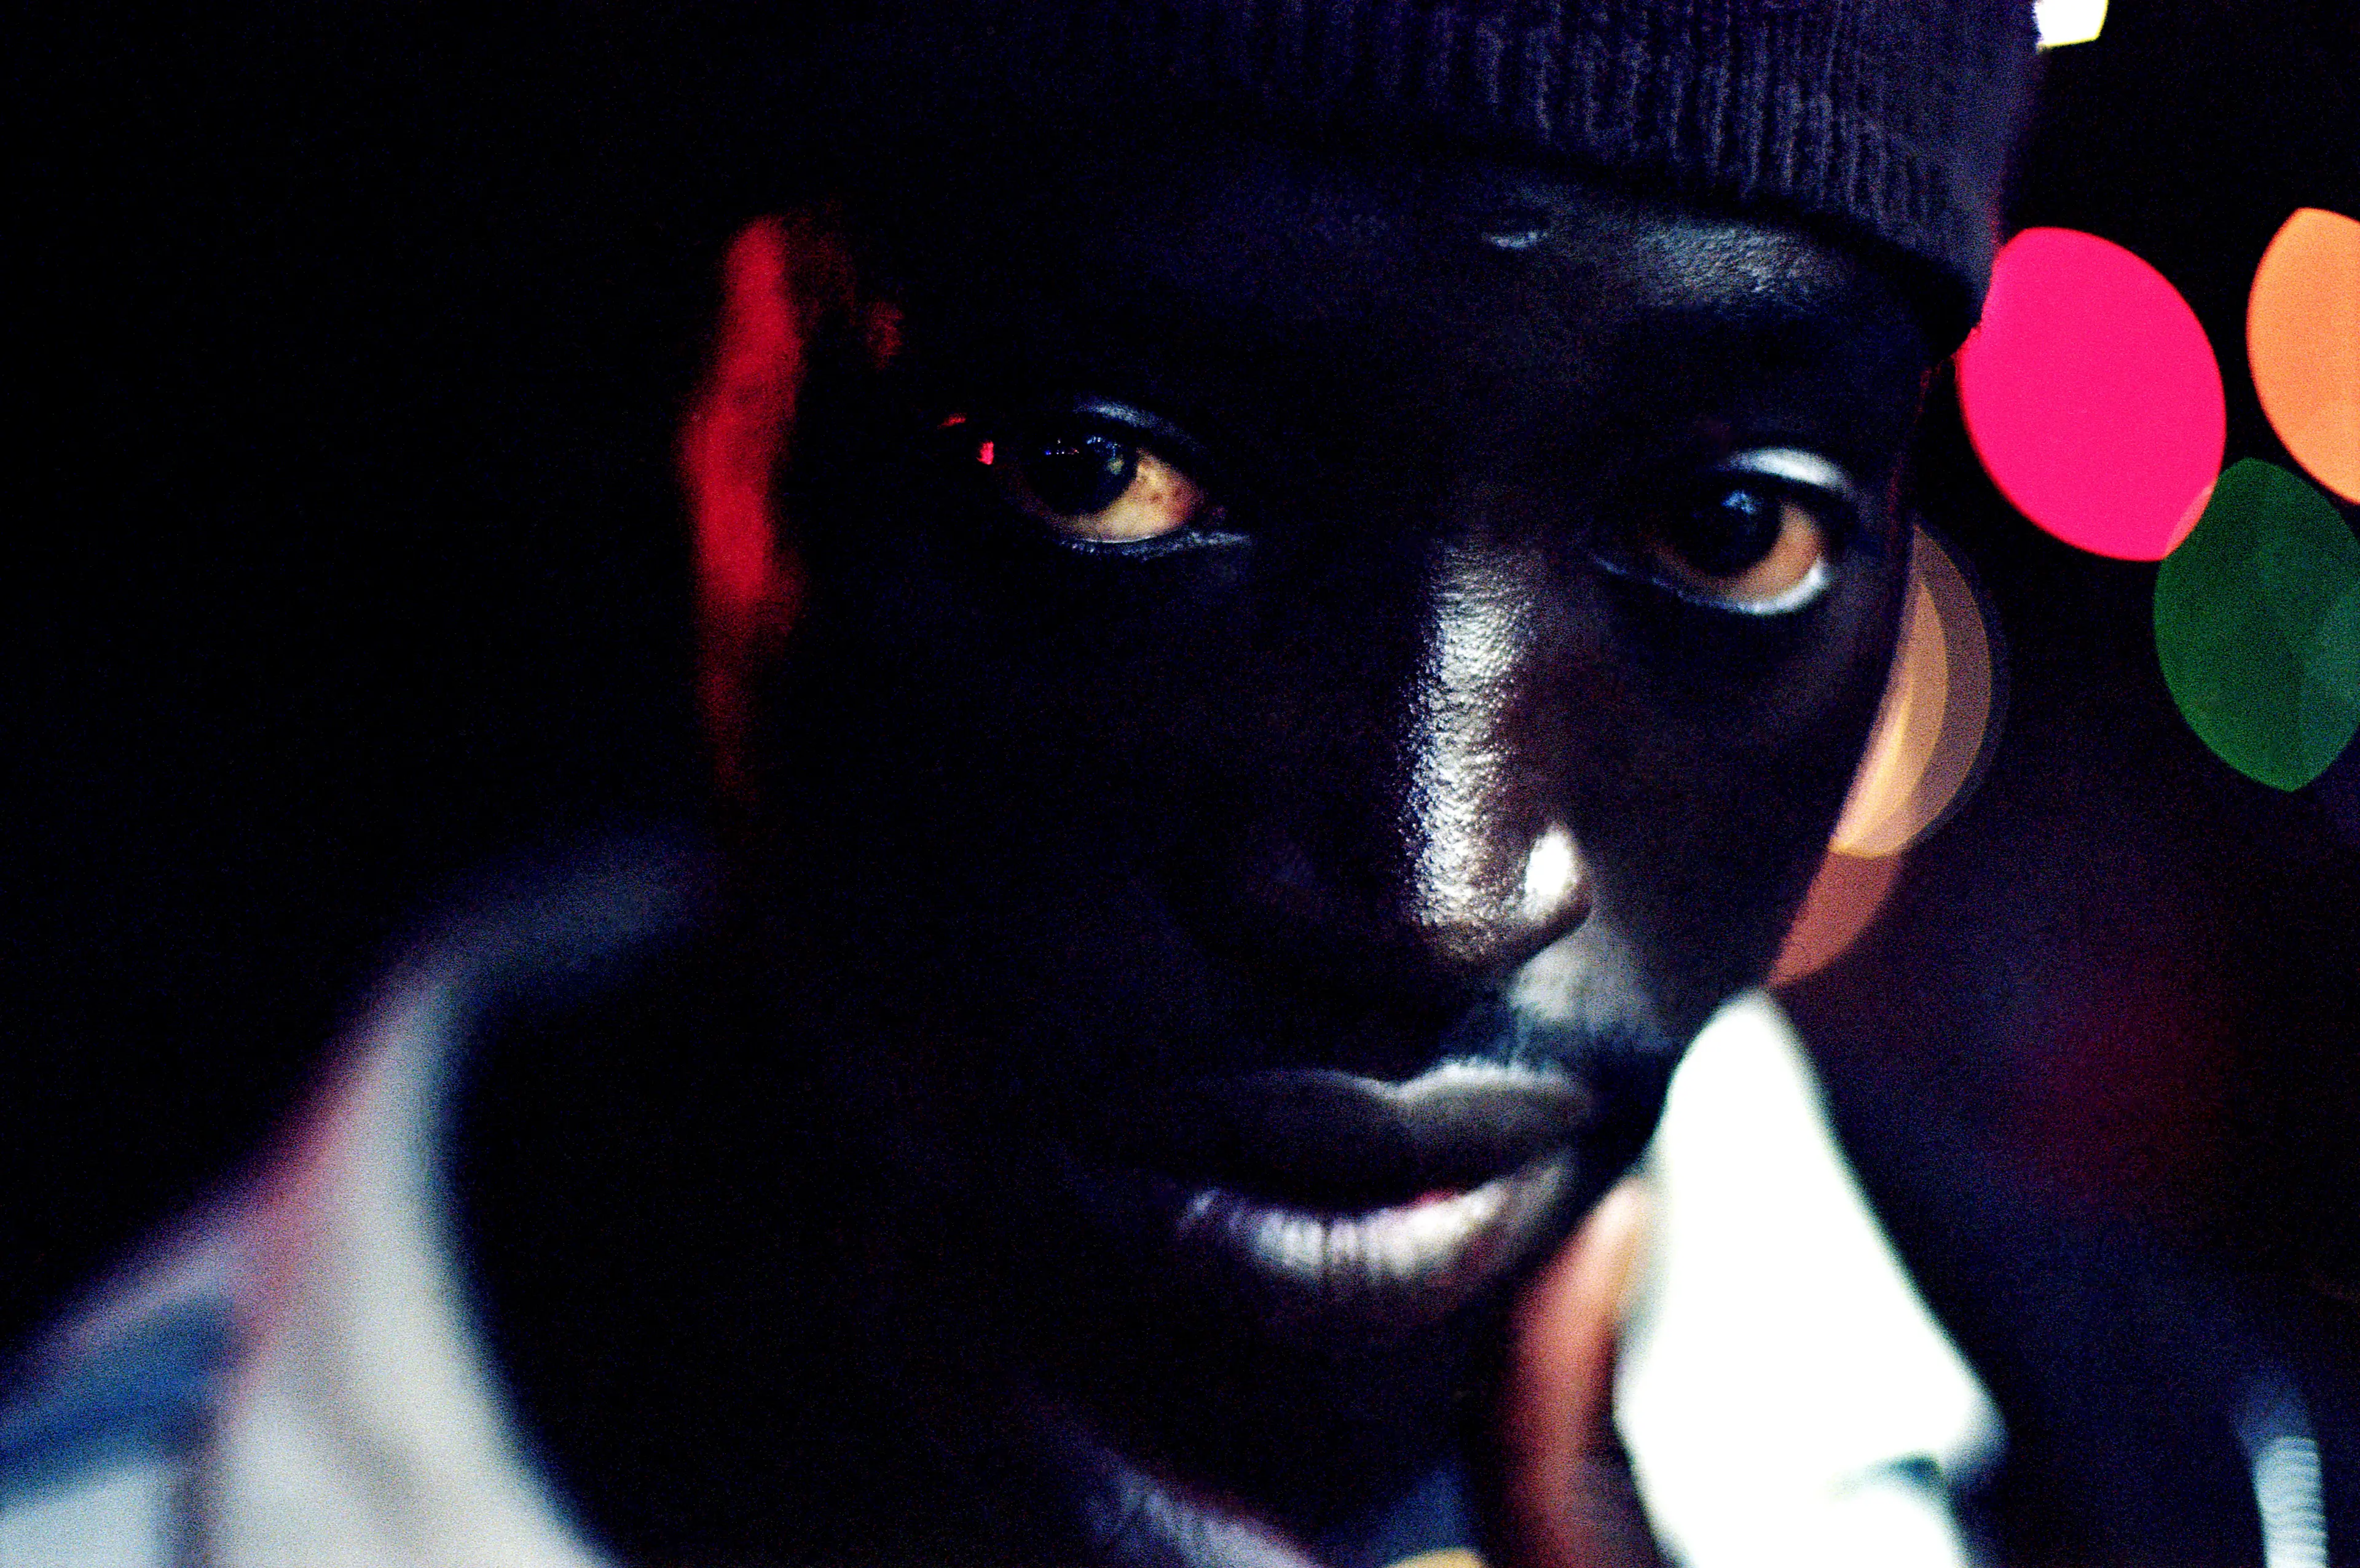 Close up photo of black man in dark surroundings, looking straight at the camera, where only eyes and a few facial features are visible.